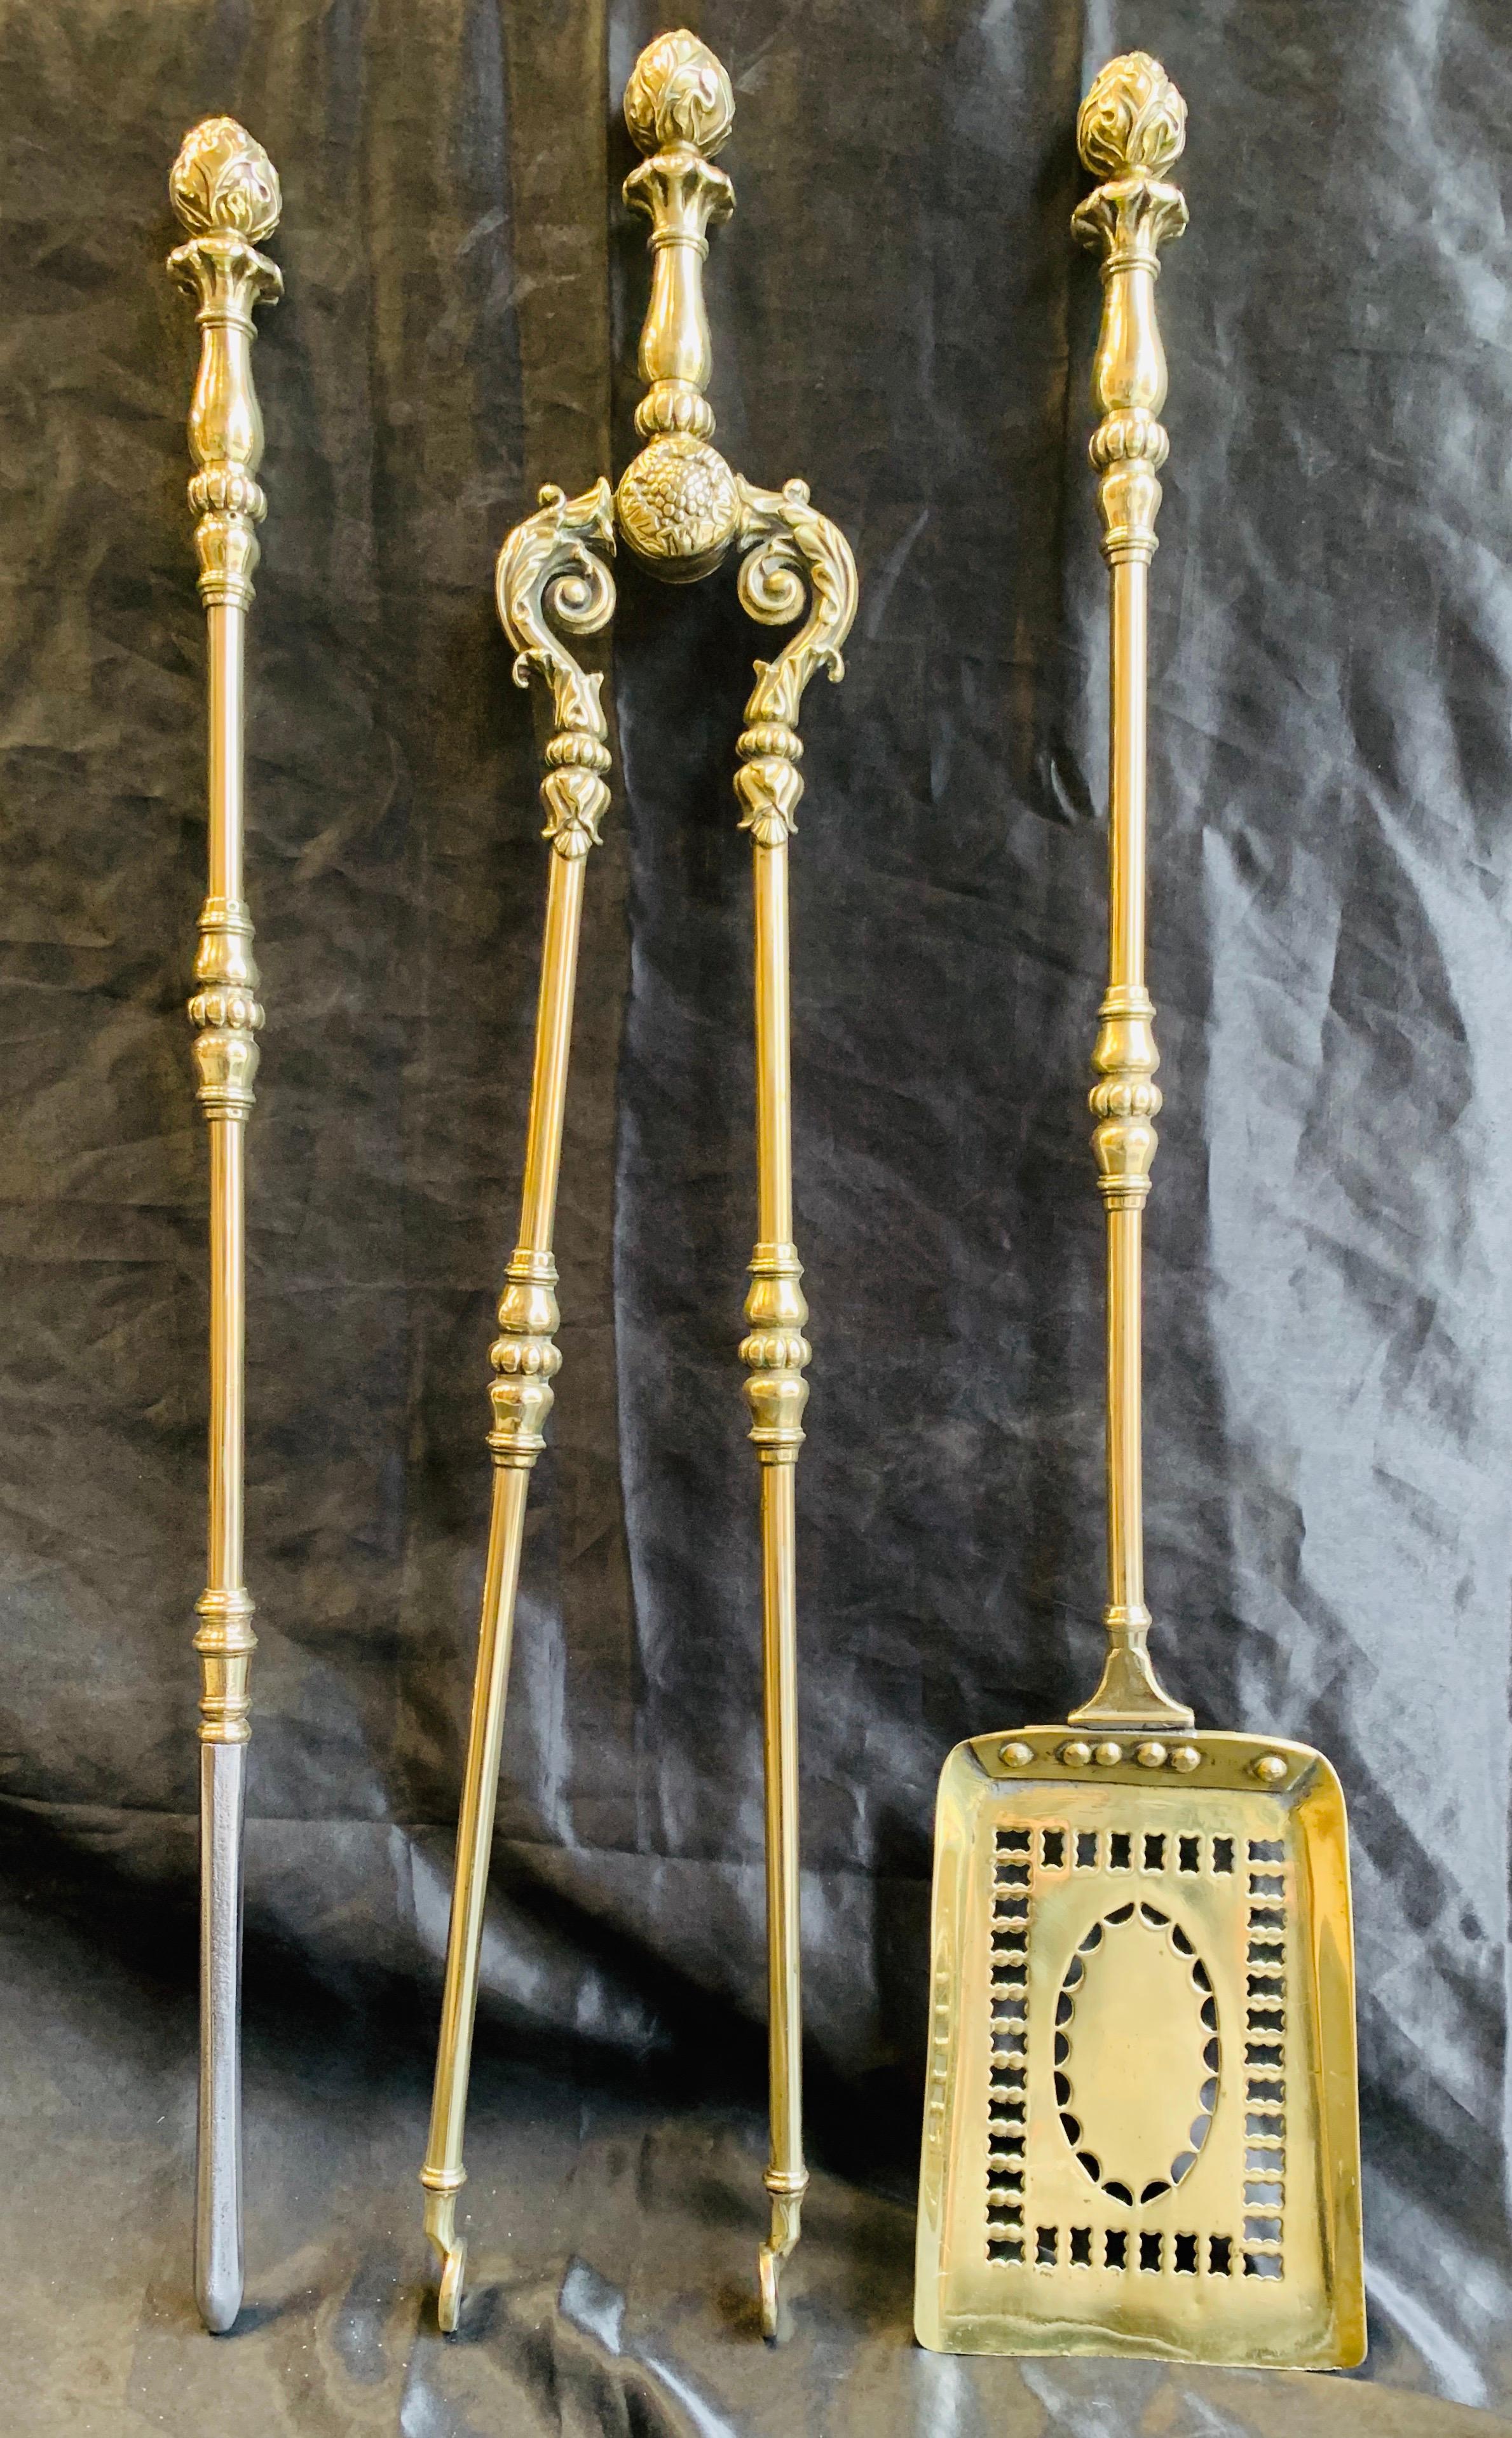 An ornate set of 19th century mid Victorian polished brass fire tools, comprising of a poker with steel end, a pierced shovel, and a pair of tongs all capped with acorn bud finials.

English, circa 1850.